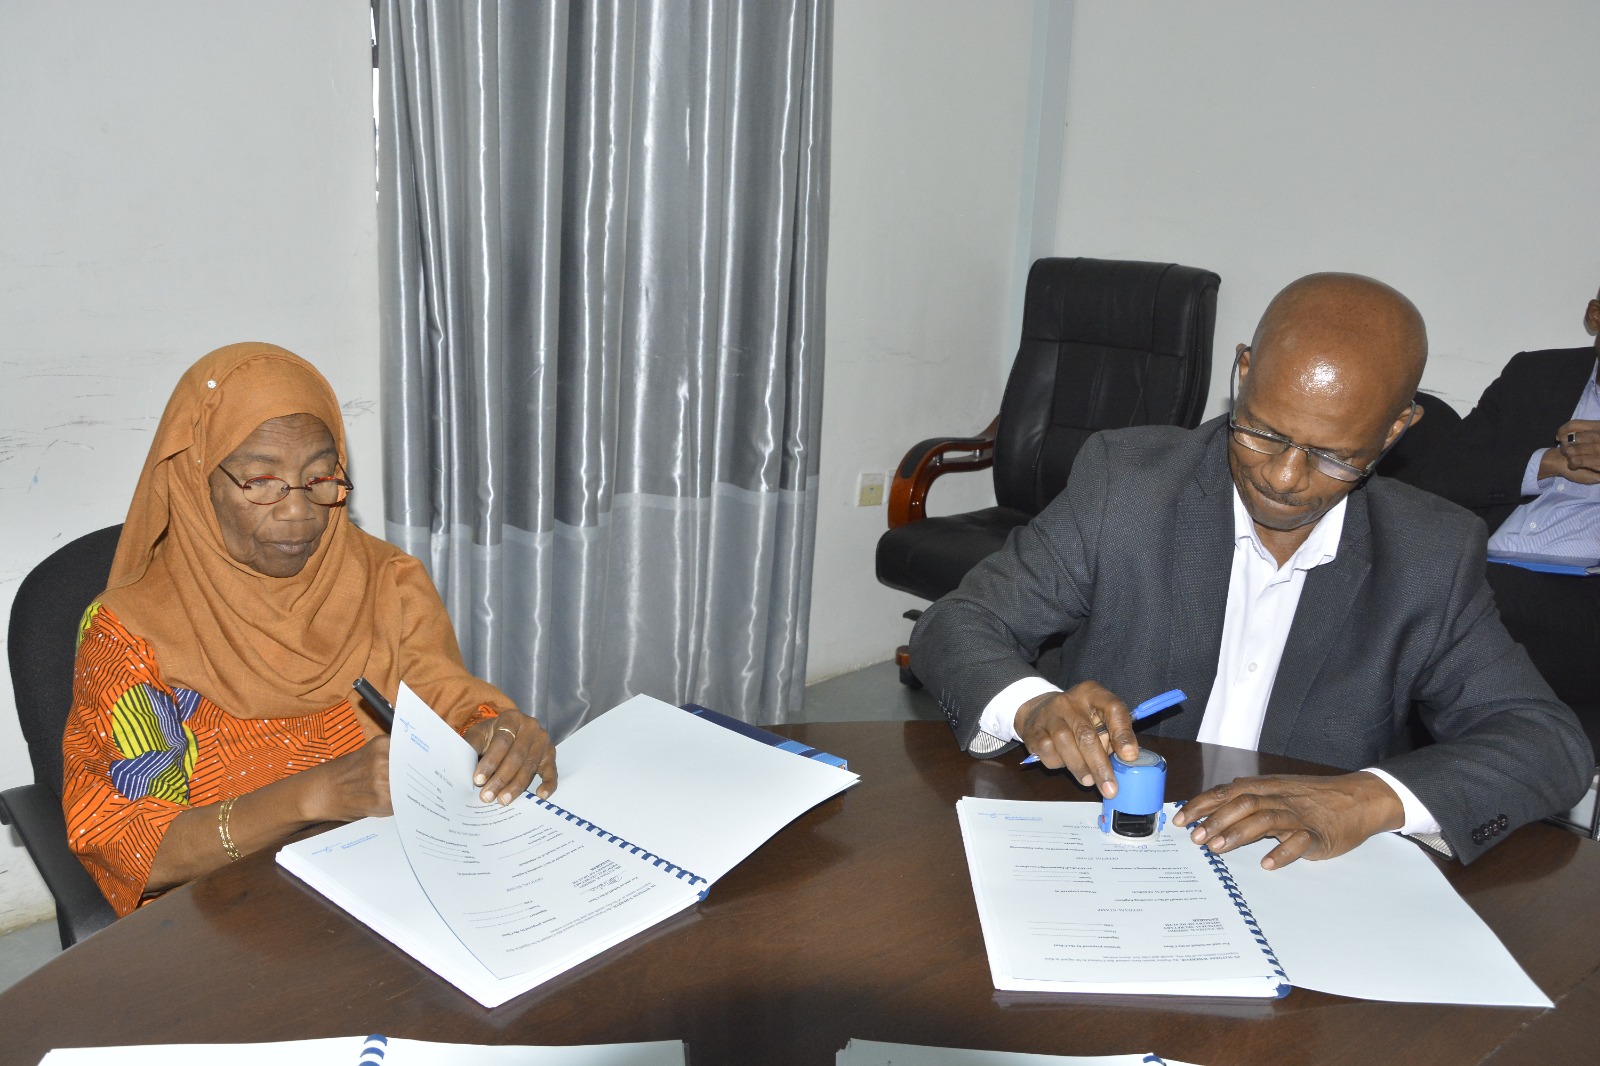 The Ministry of Health Zanzibar has signed a contract for the renovation and expansion of Mnazi mmoja Hospital